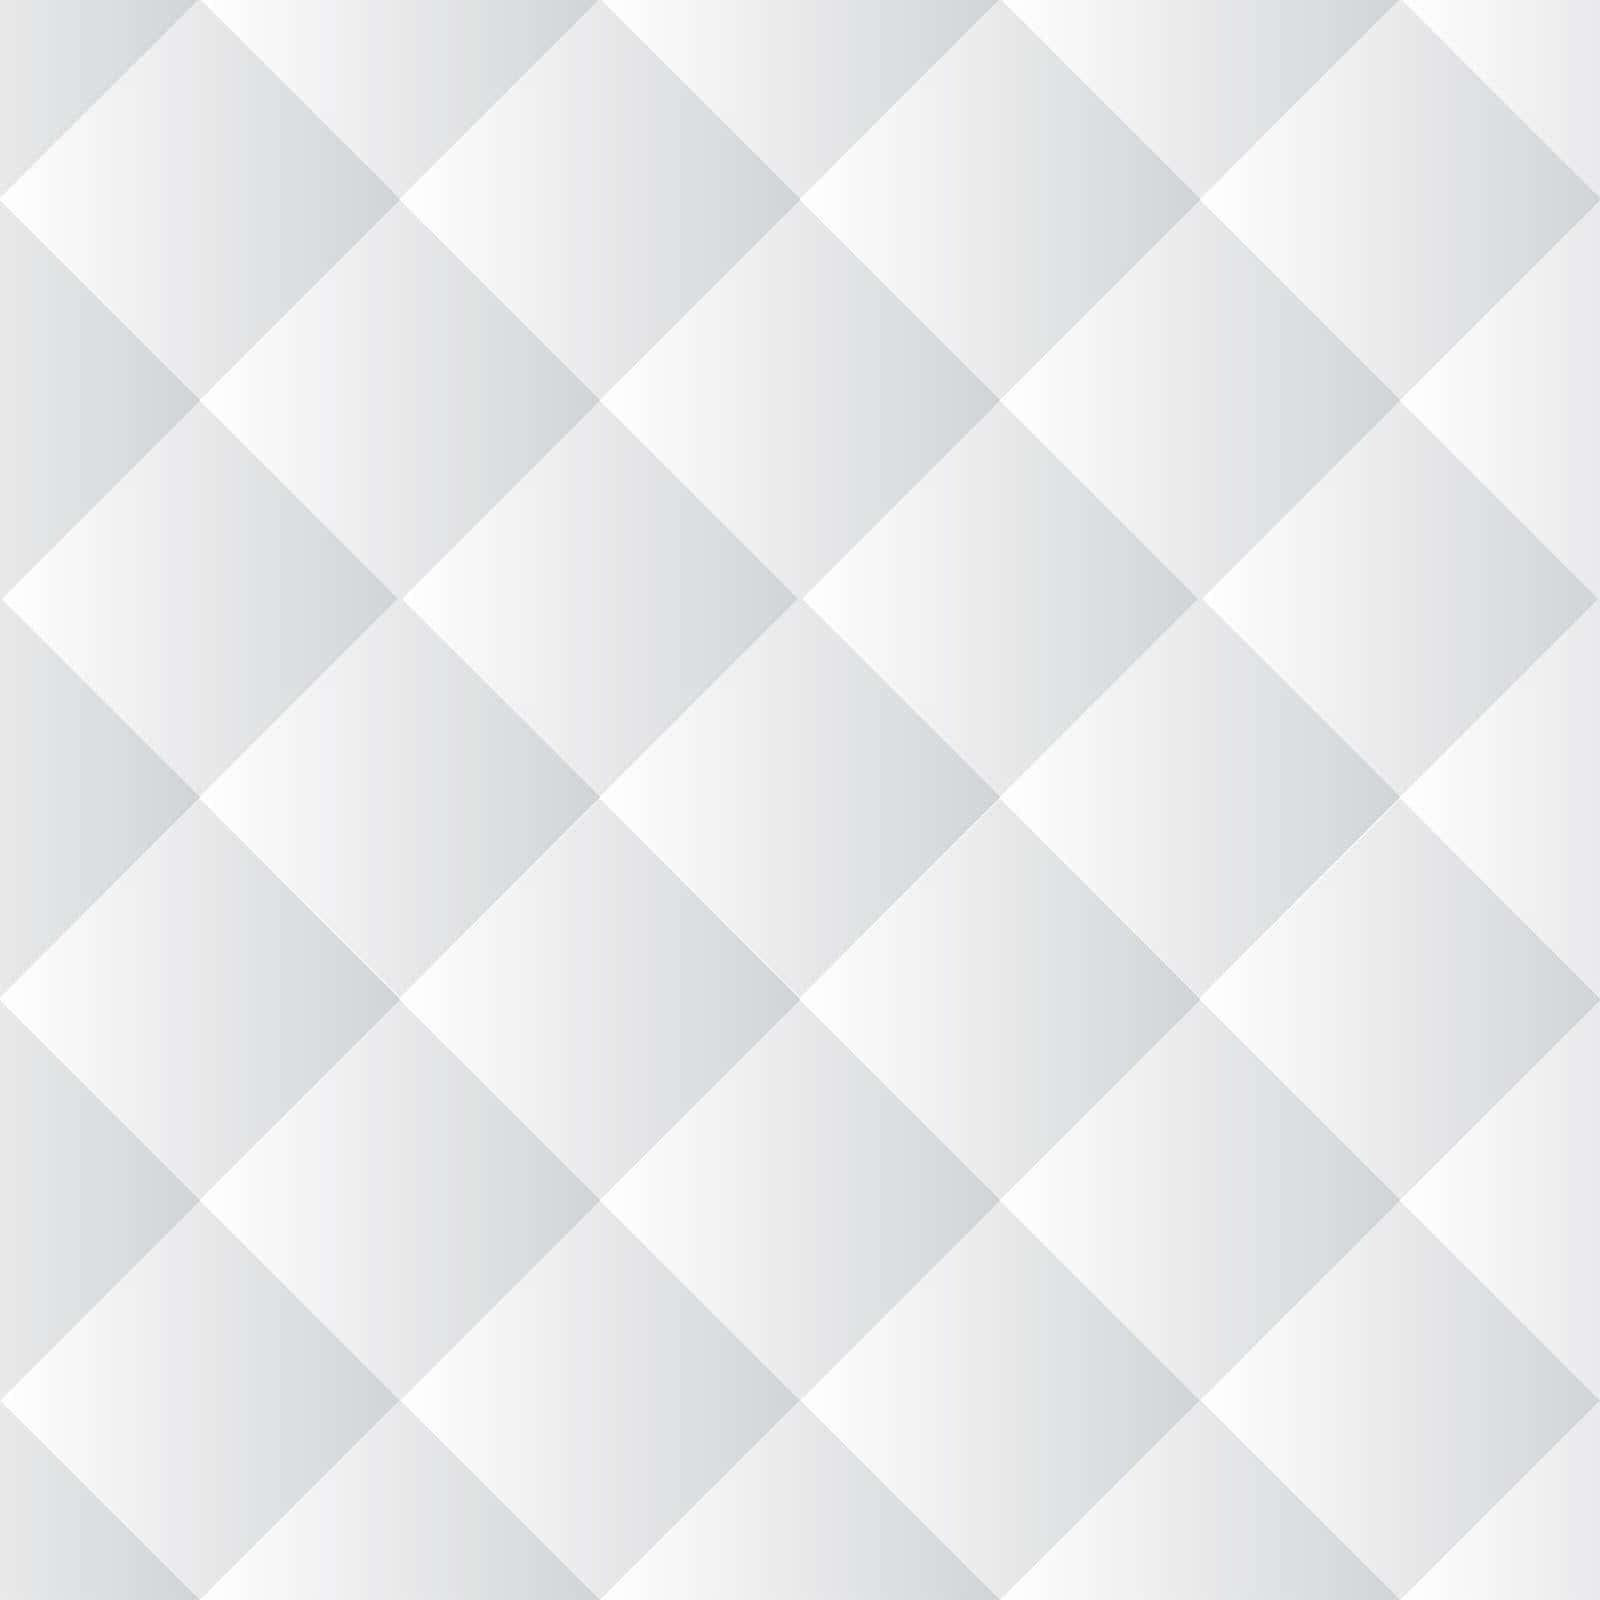 Checkered White Texture Pictures